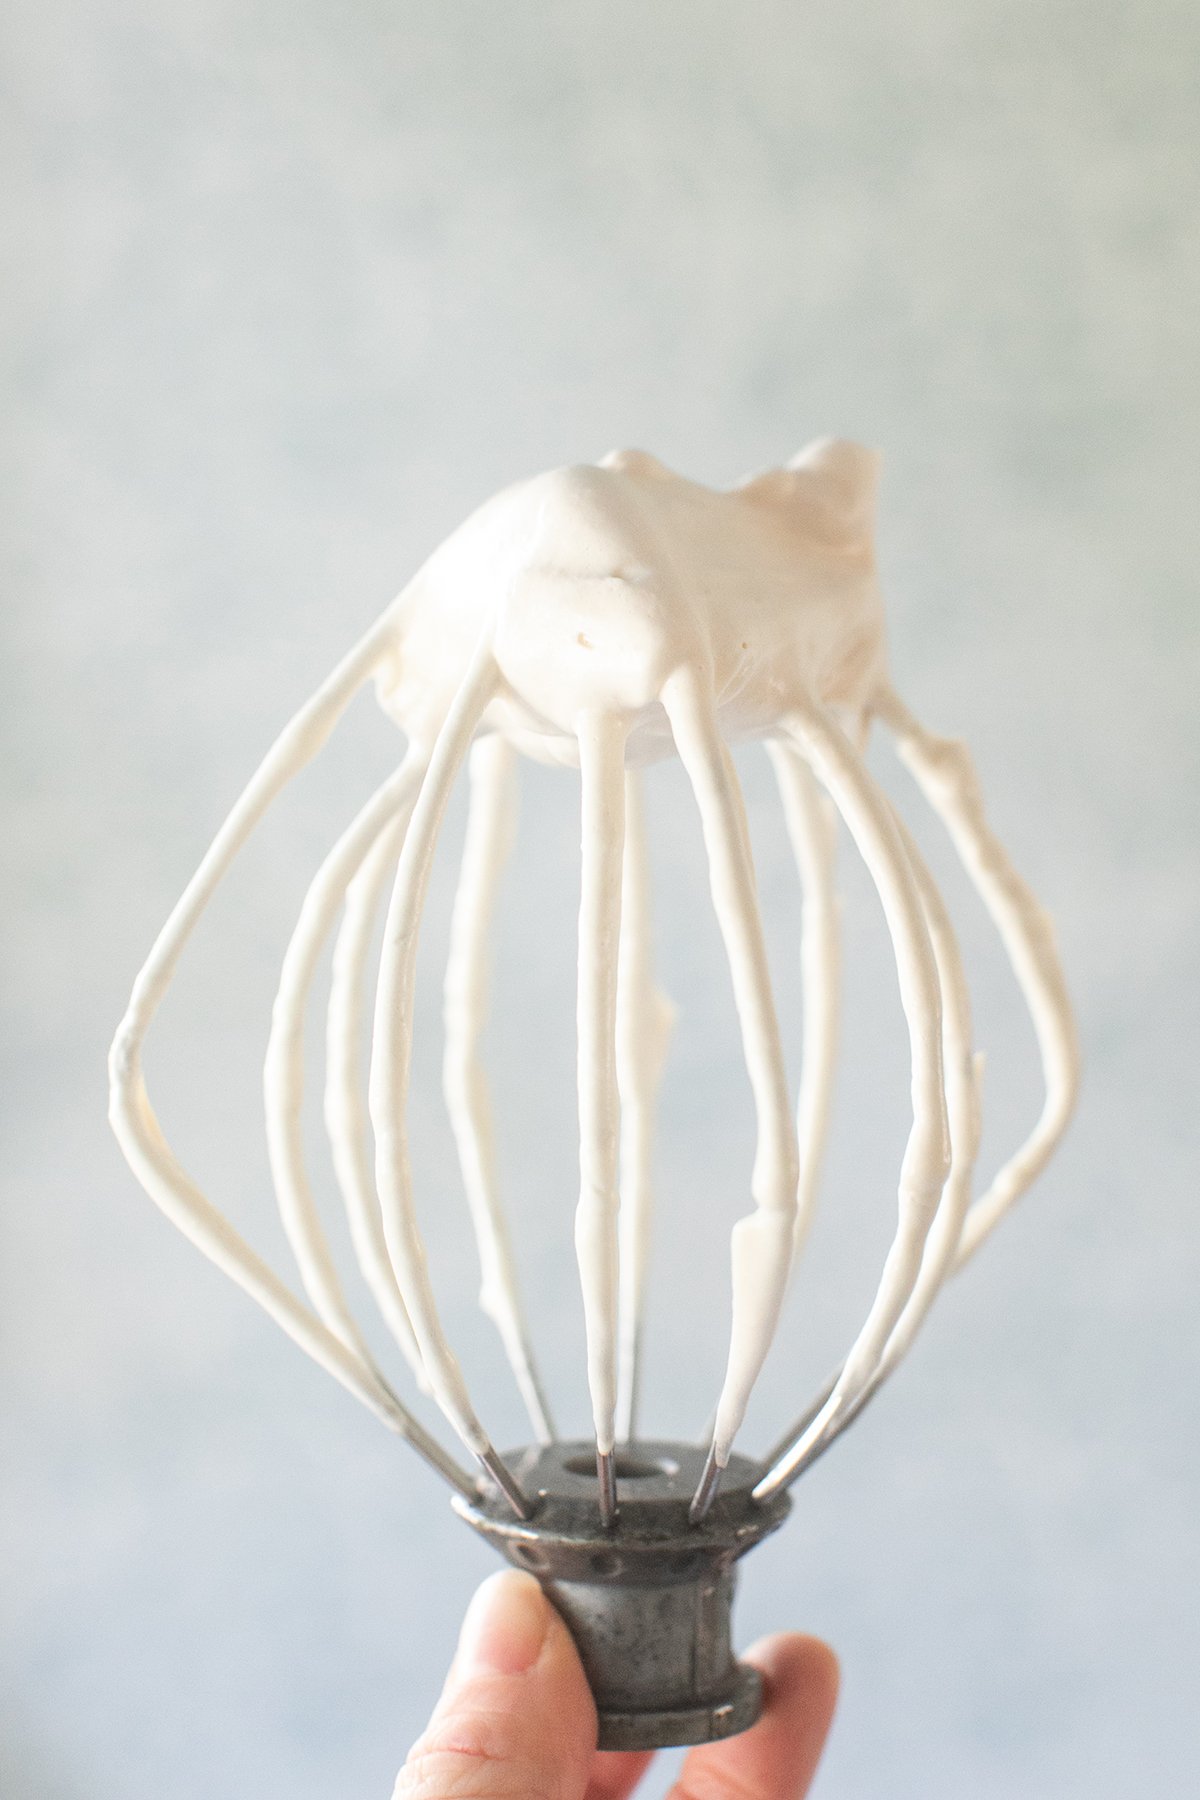 Maple syrup frosting on a whisk.